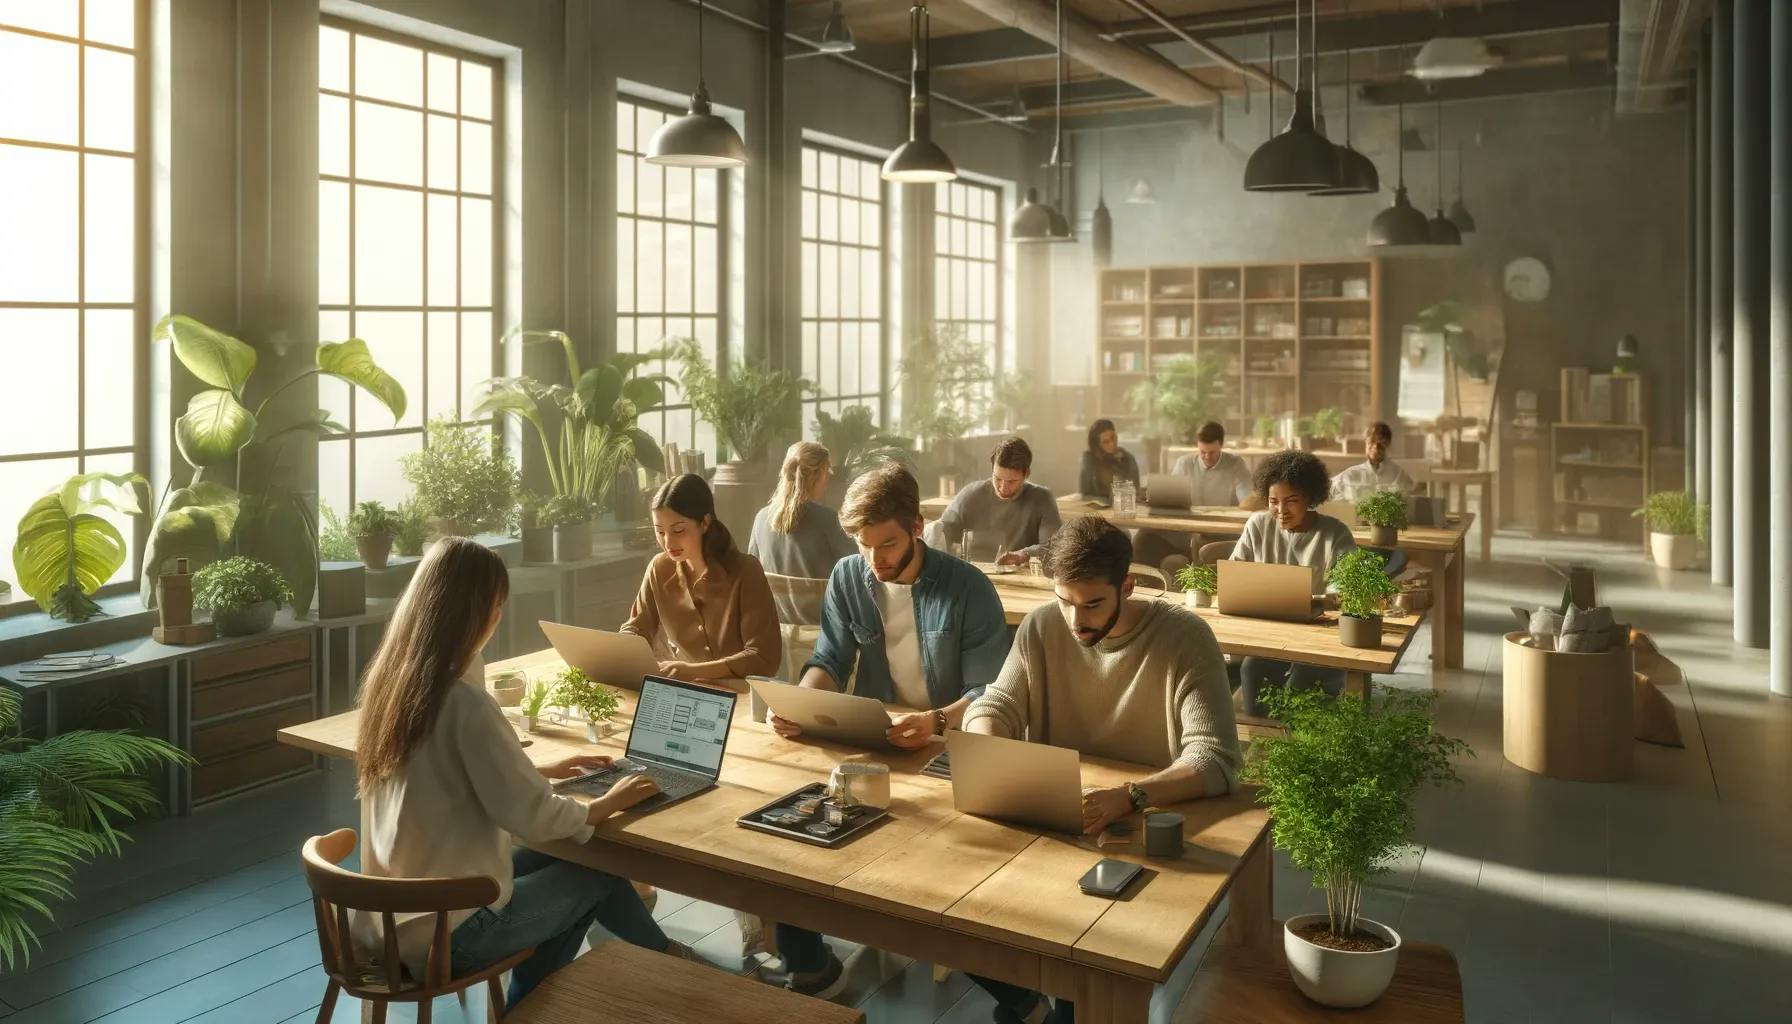 A small group of people working together on laptops in a cosy, environmentally friendly office. The office has plants, natural light and sustainable materials. The atmosphere is relaxed and collaborative, reflecting the support and partnership at every stage of digital development.